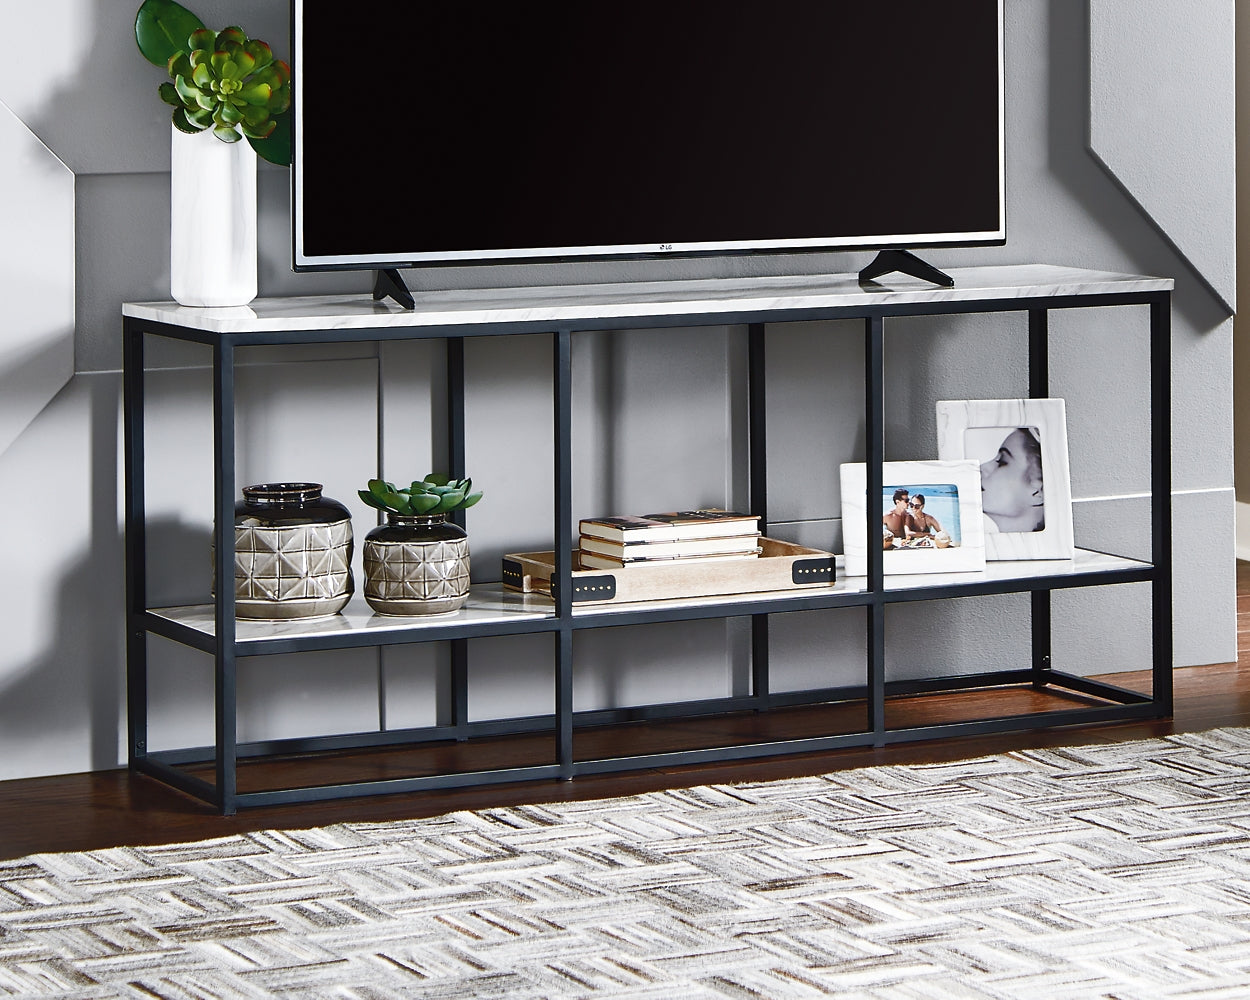 Donnesta Extra Large TV Stand at Cloud 9 Mattress & Furniture furniture, home furnishing, home decor